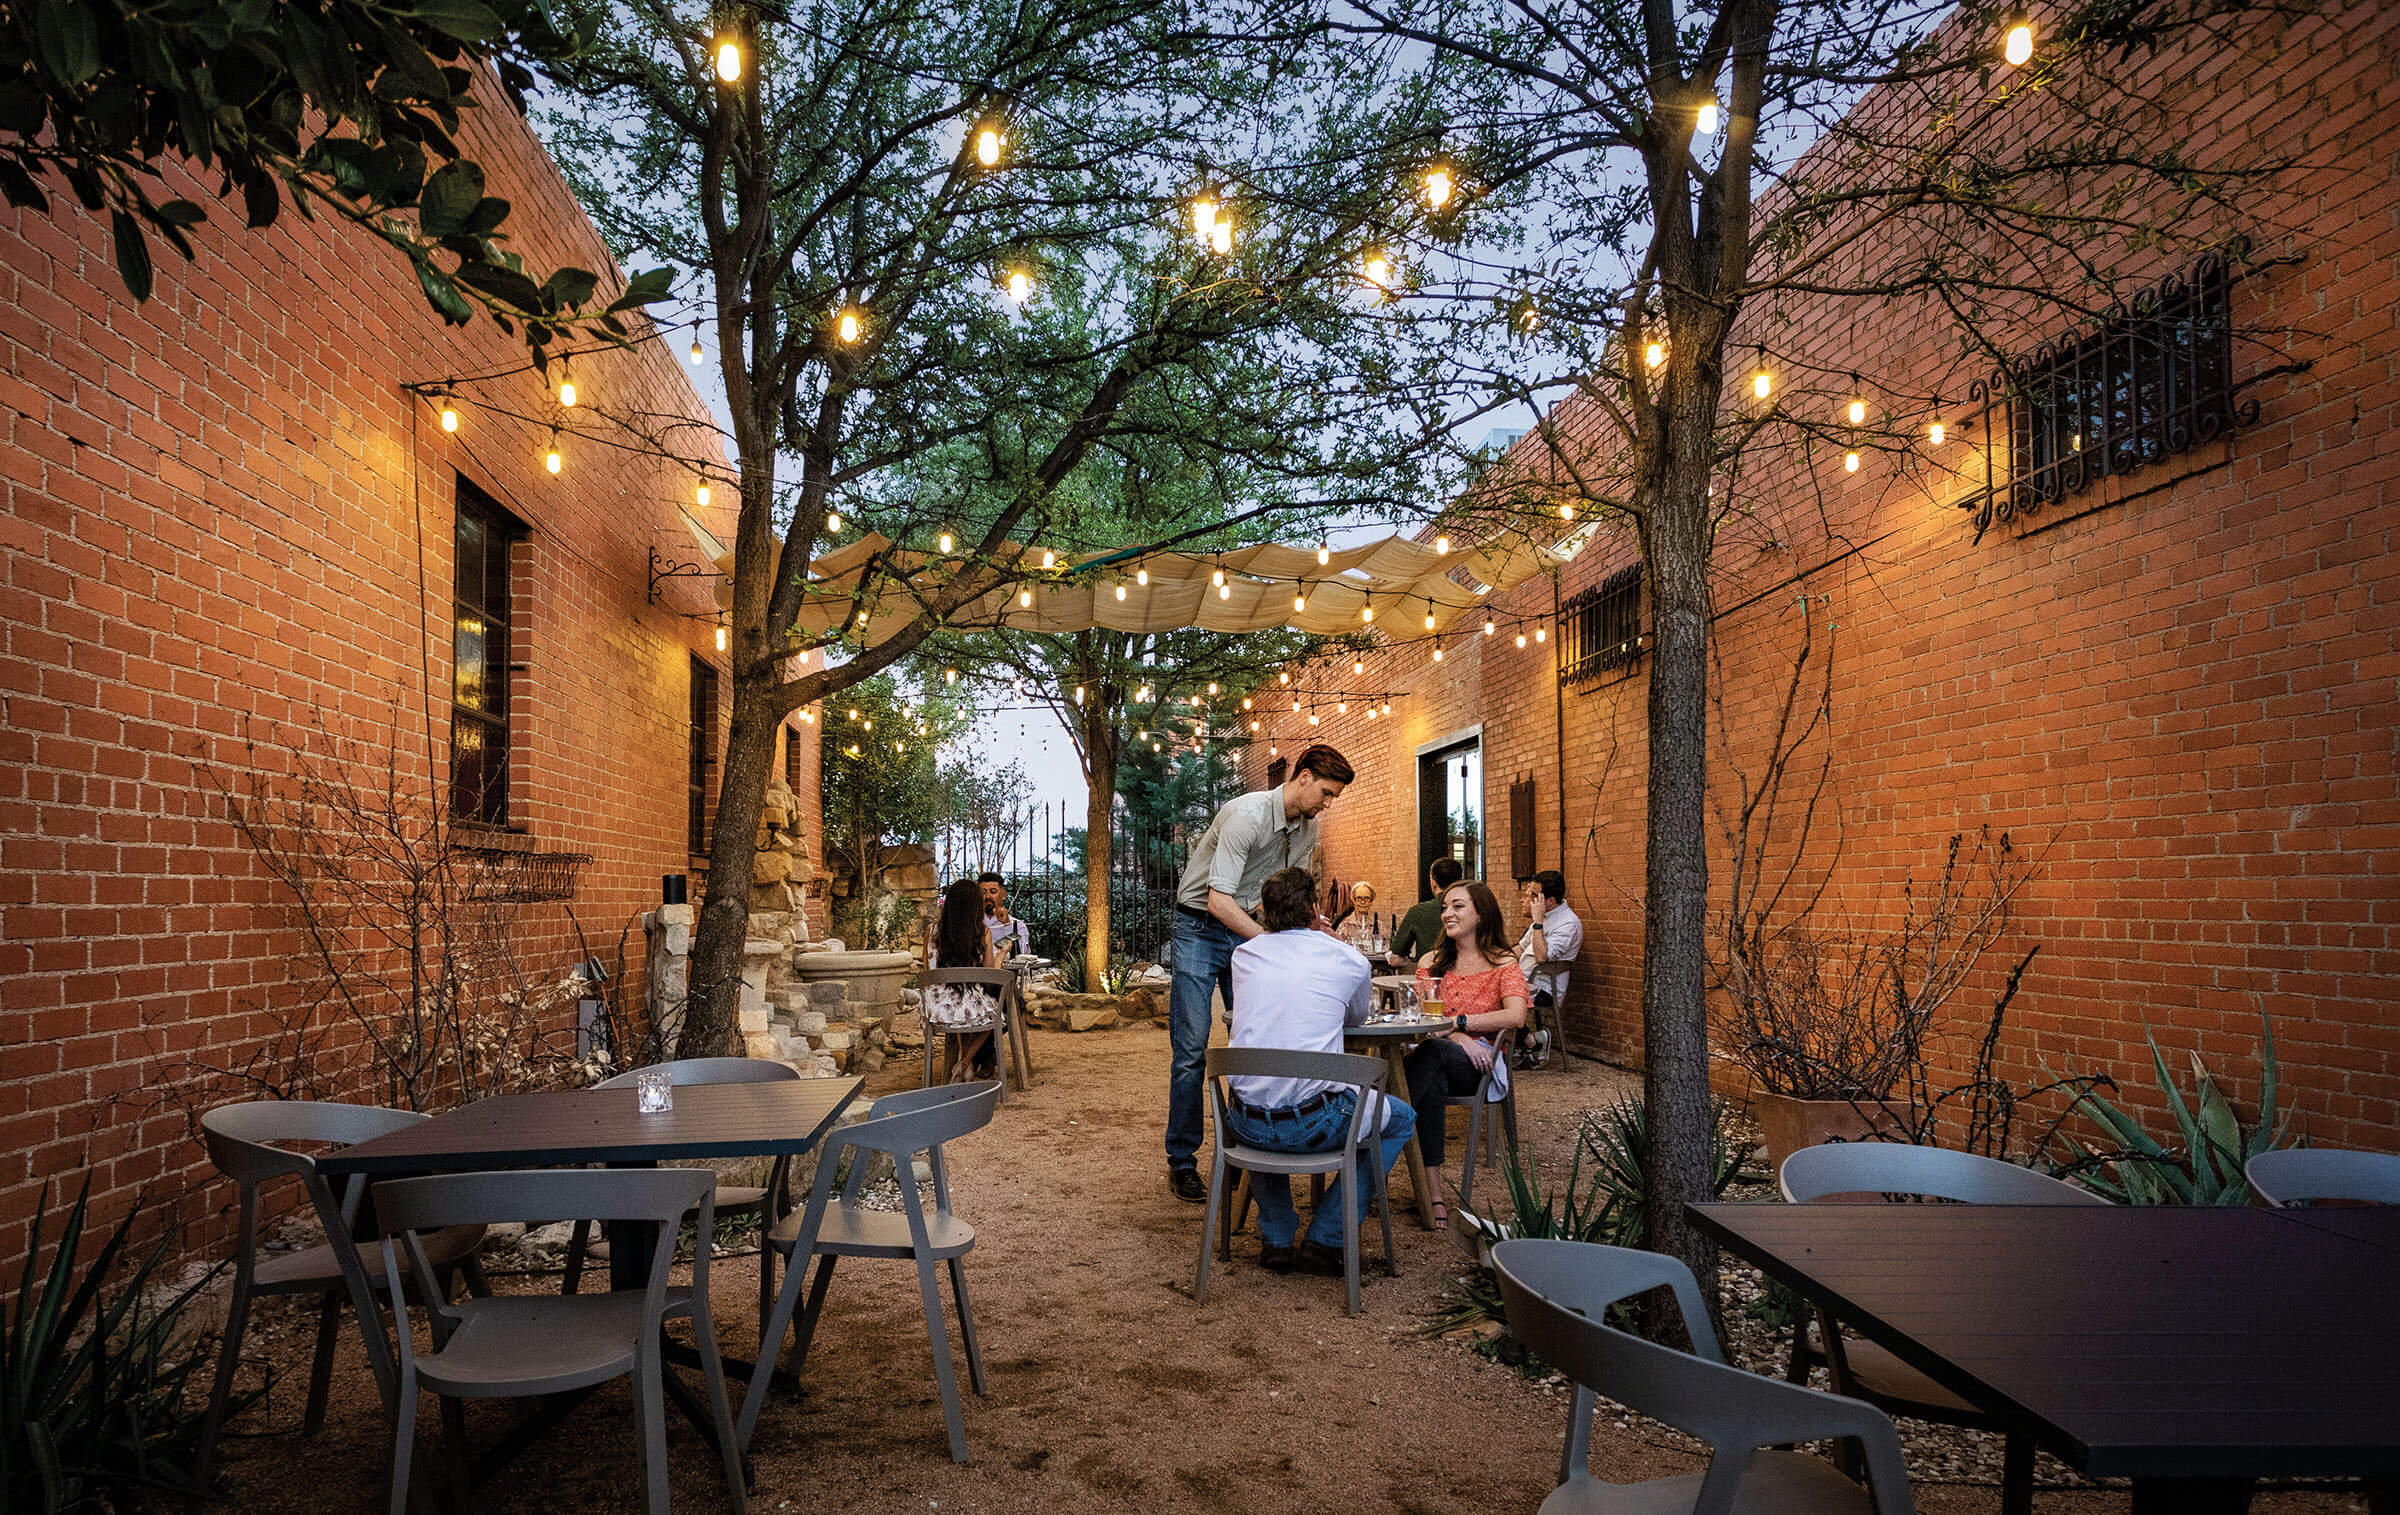 Diners sit in a brick-walled courtyard under trendy string lights and trees